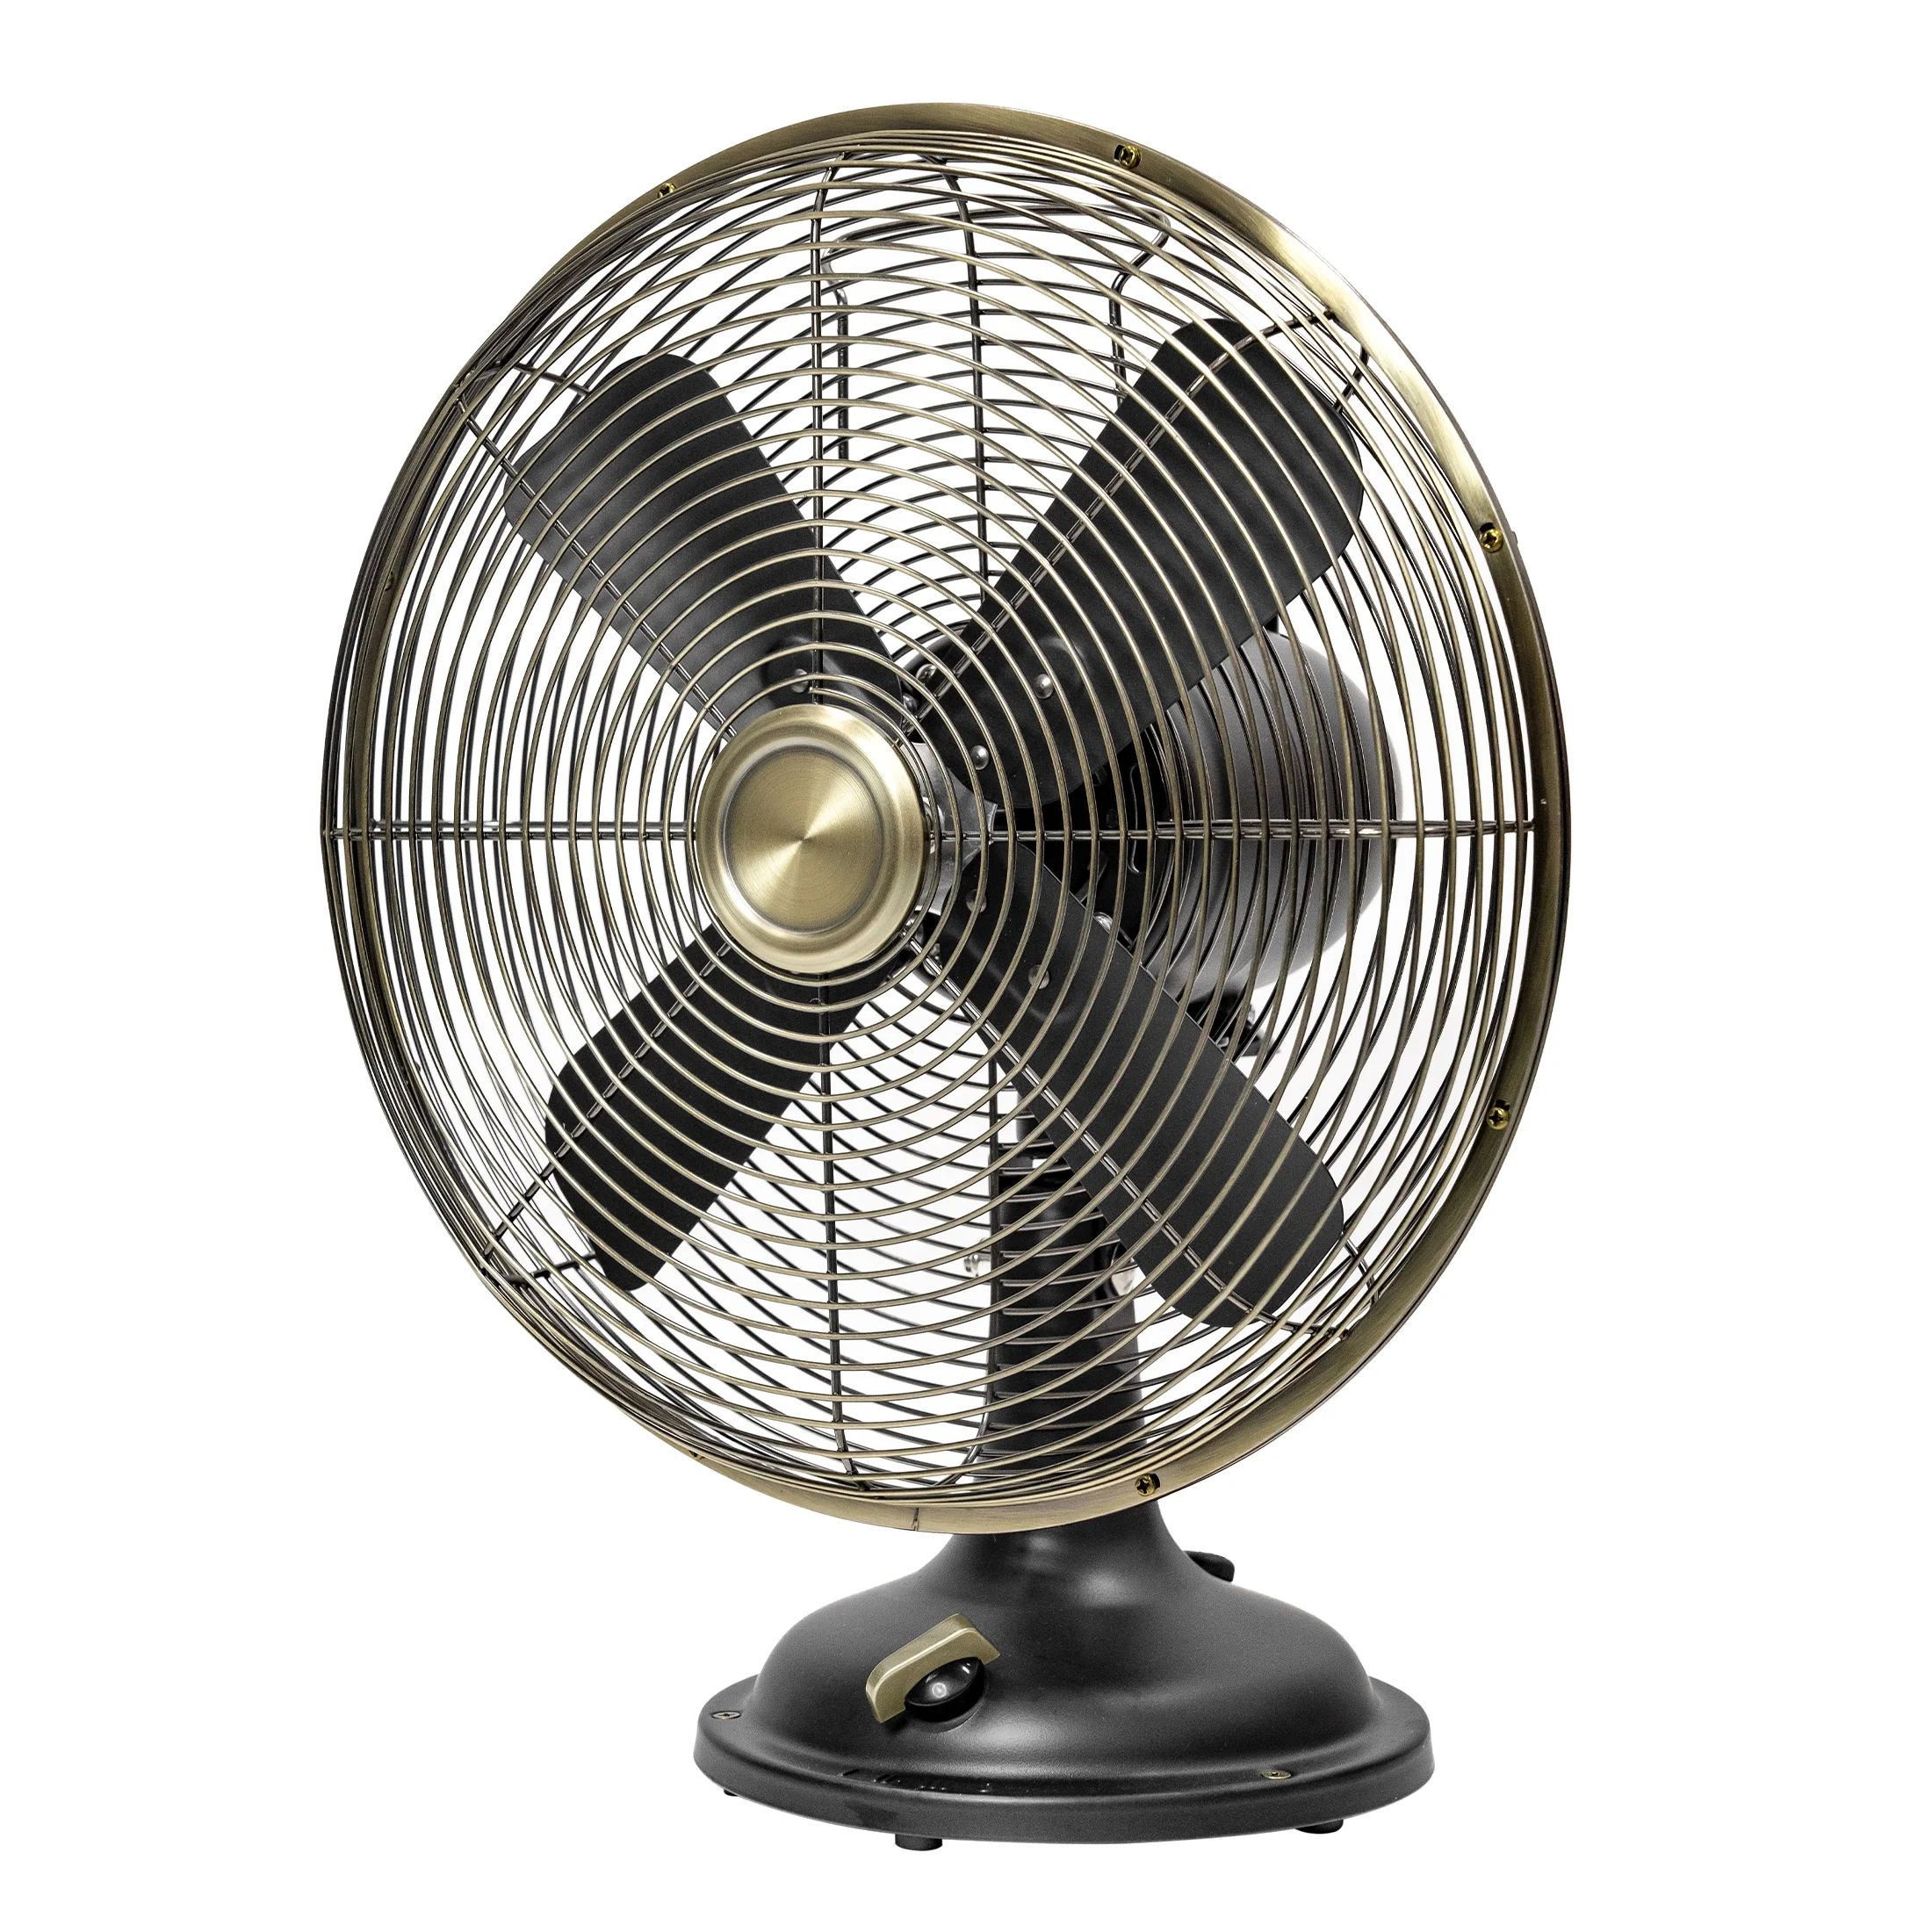 Better Homes & Gardens New 12 inch Vintage Oscillating Table Fan Black with 3 Speeds | Walmart (US)